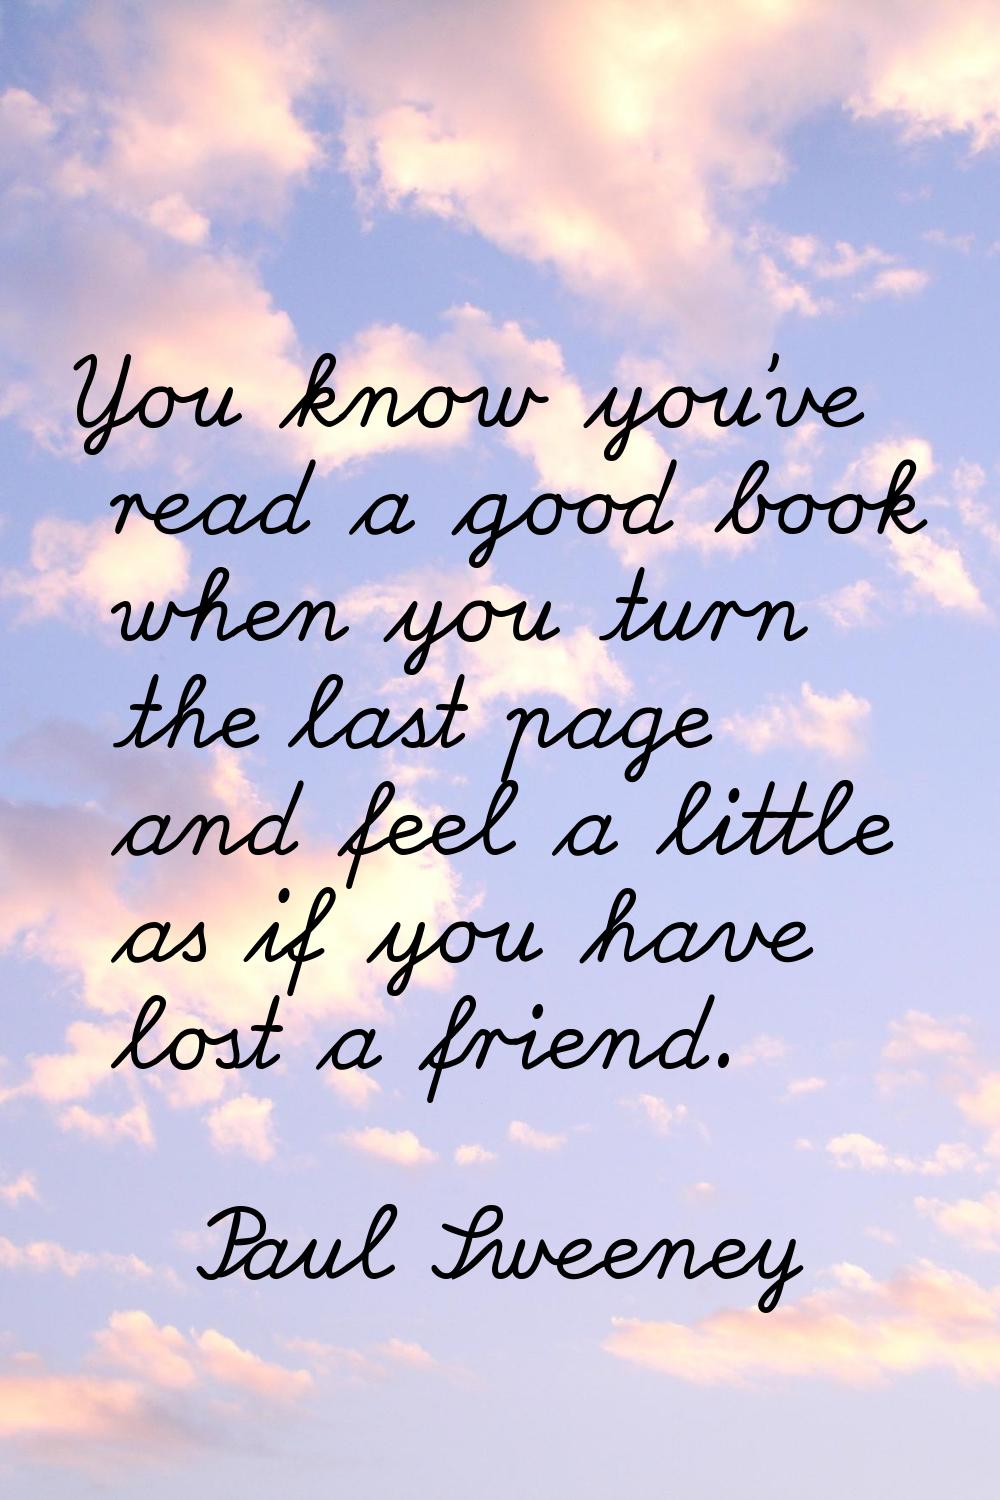 You know you've read a good book when you turn the last page and feel a little as if you have lost 